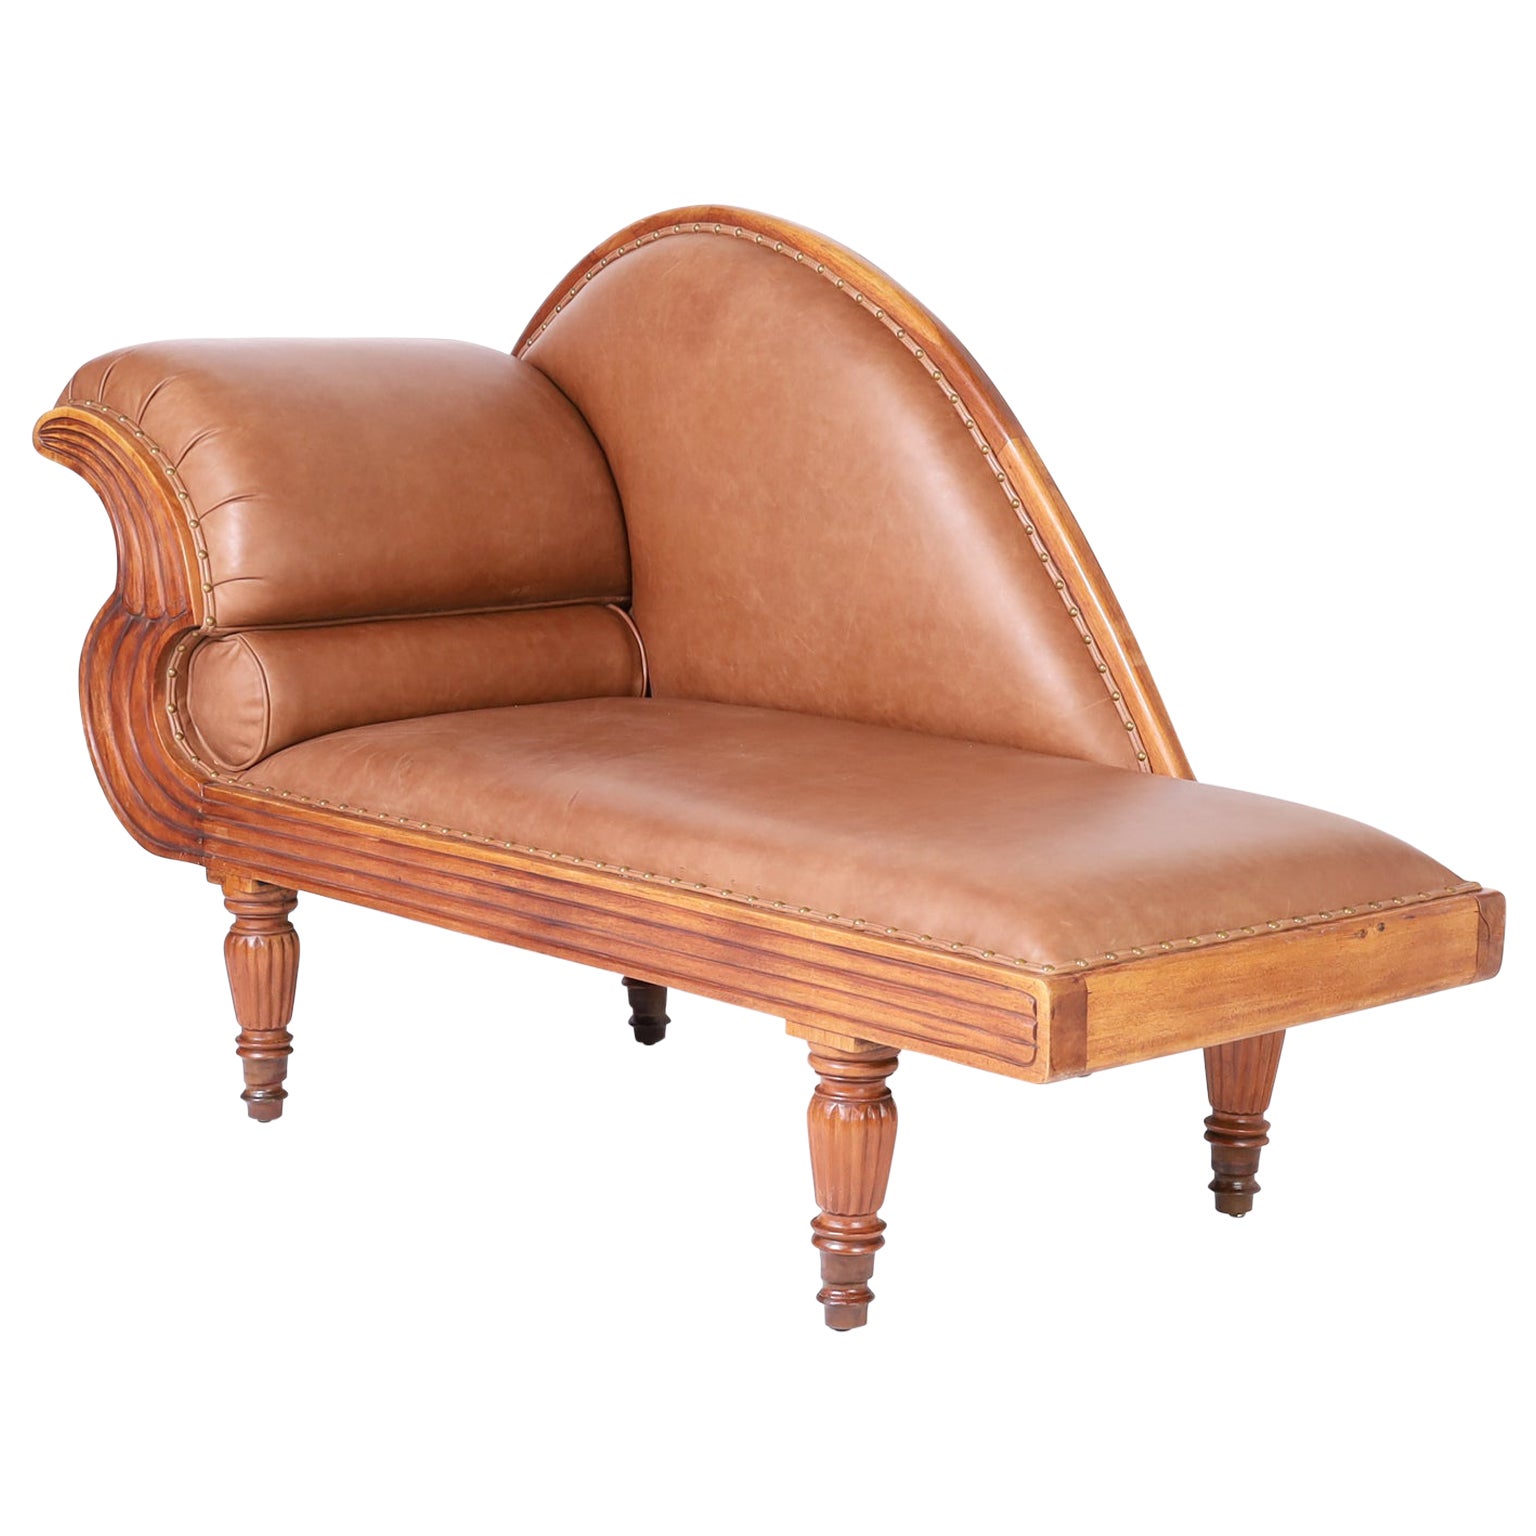 Anglo Indian Daybed or Récamier with Brown Leather